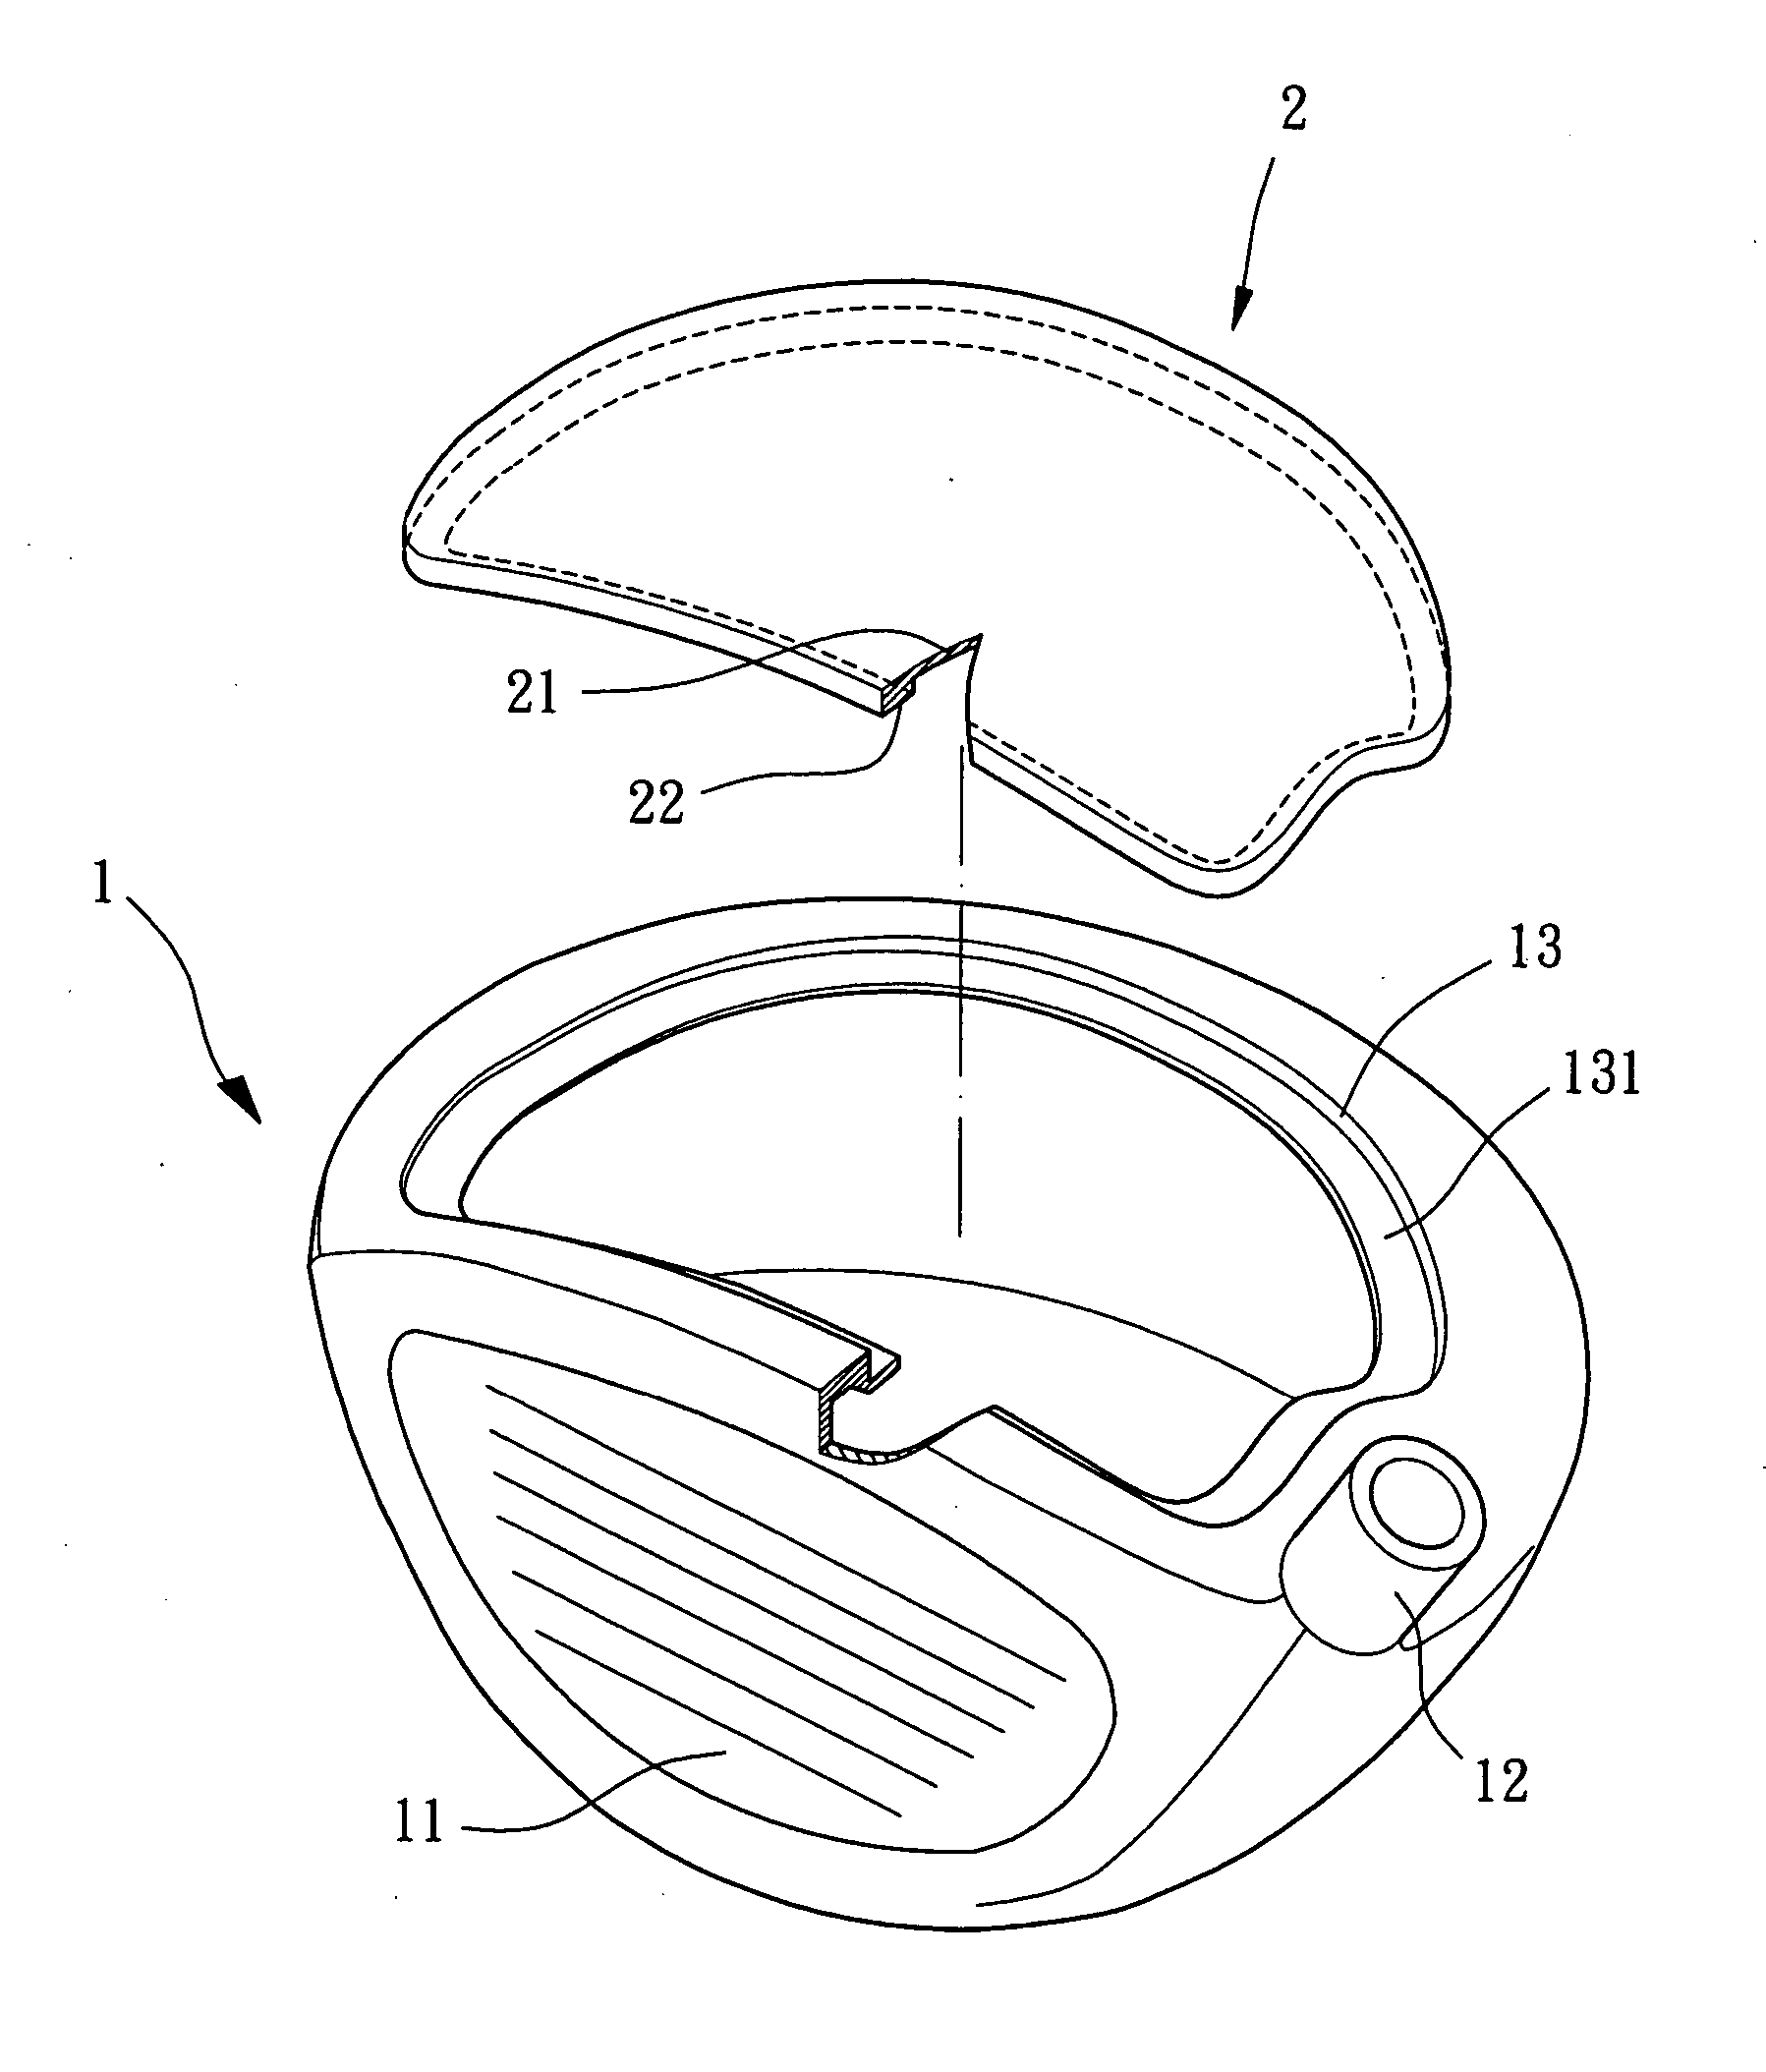 Golf club head having a thin-type cover plate structure